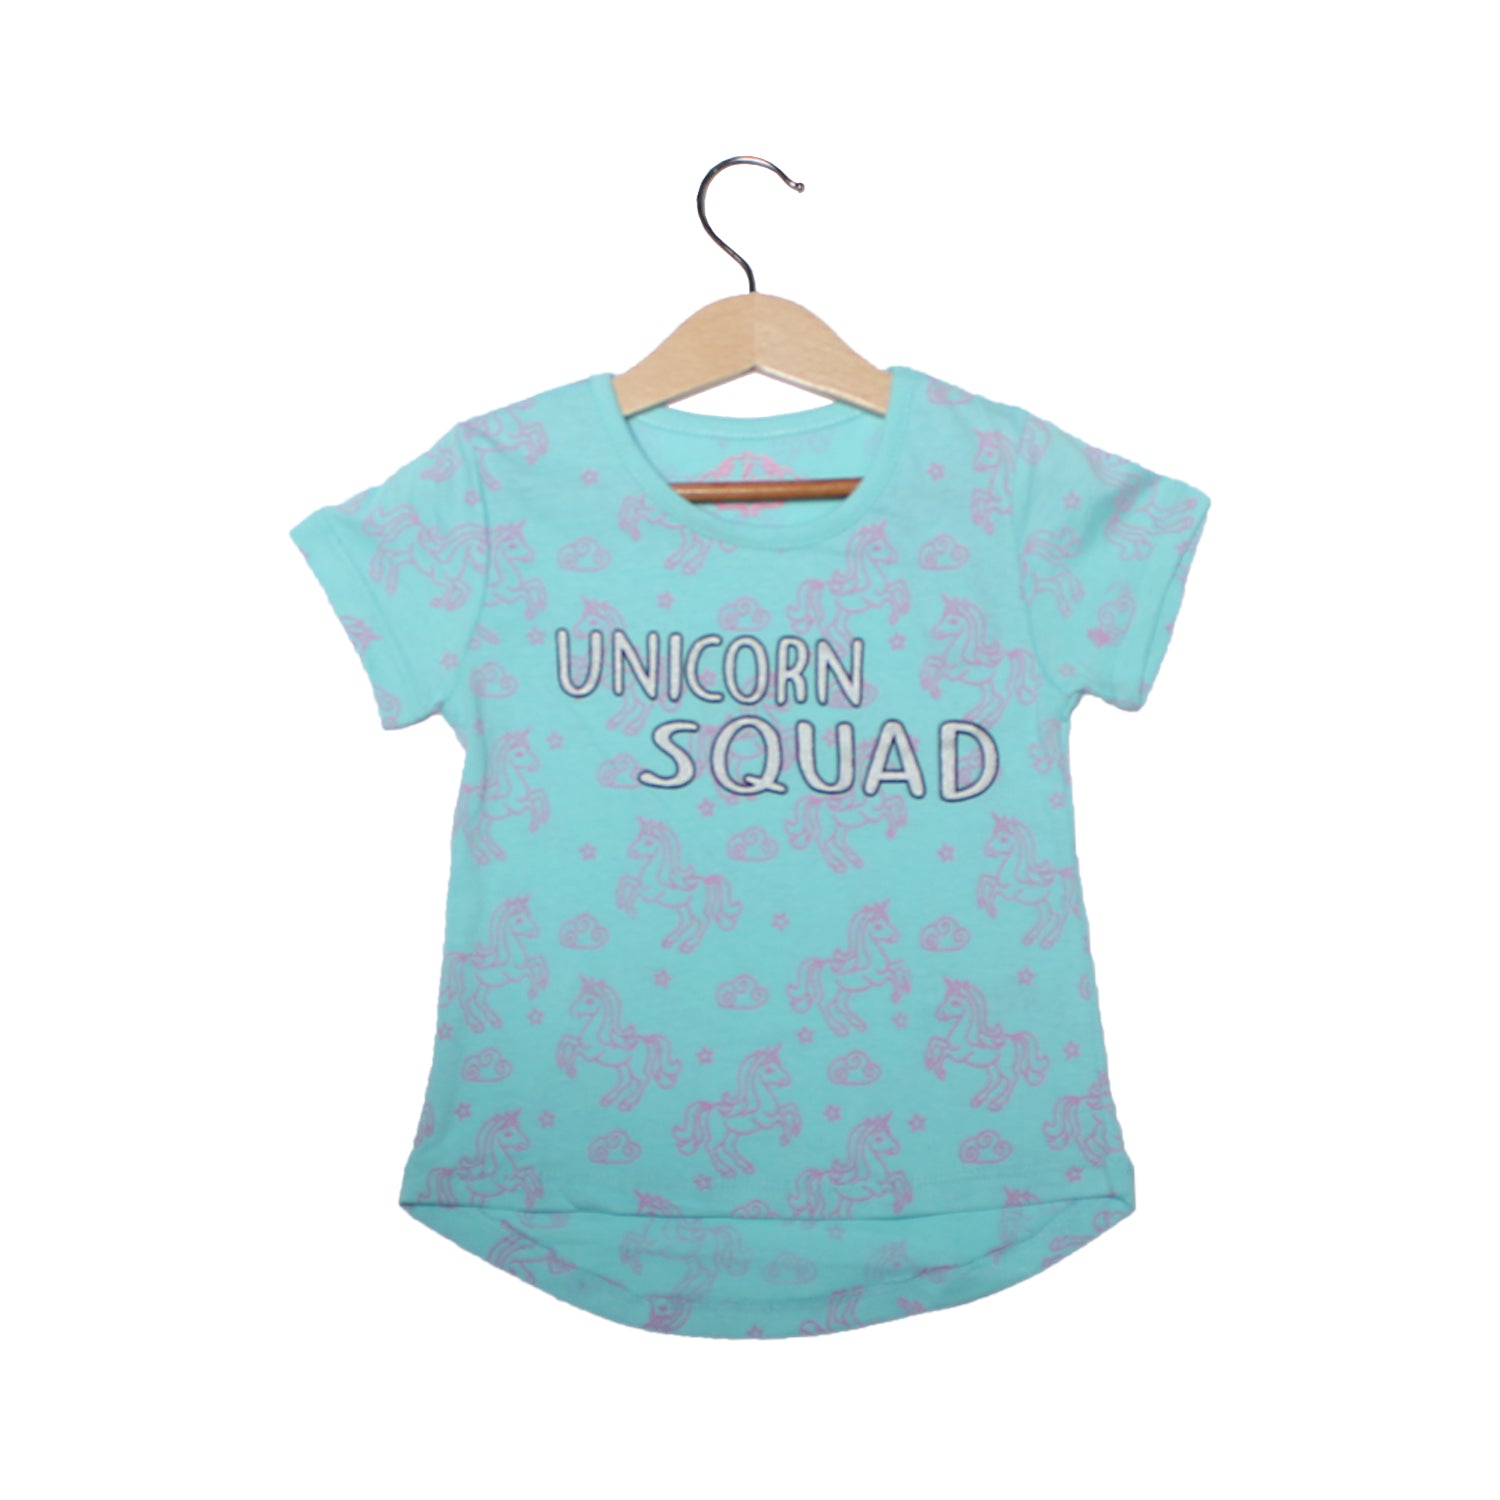 NEW SKY BLUE UNICORN SQUAD PRINTED T-SHIRT TOP FOR GIRLS